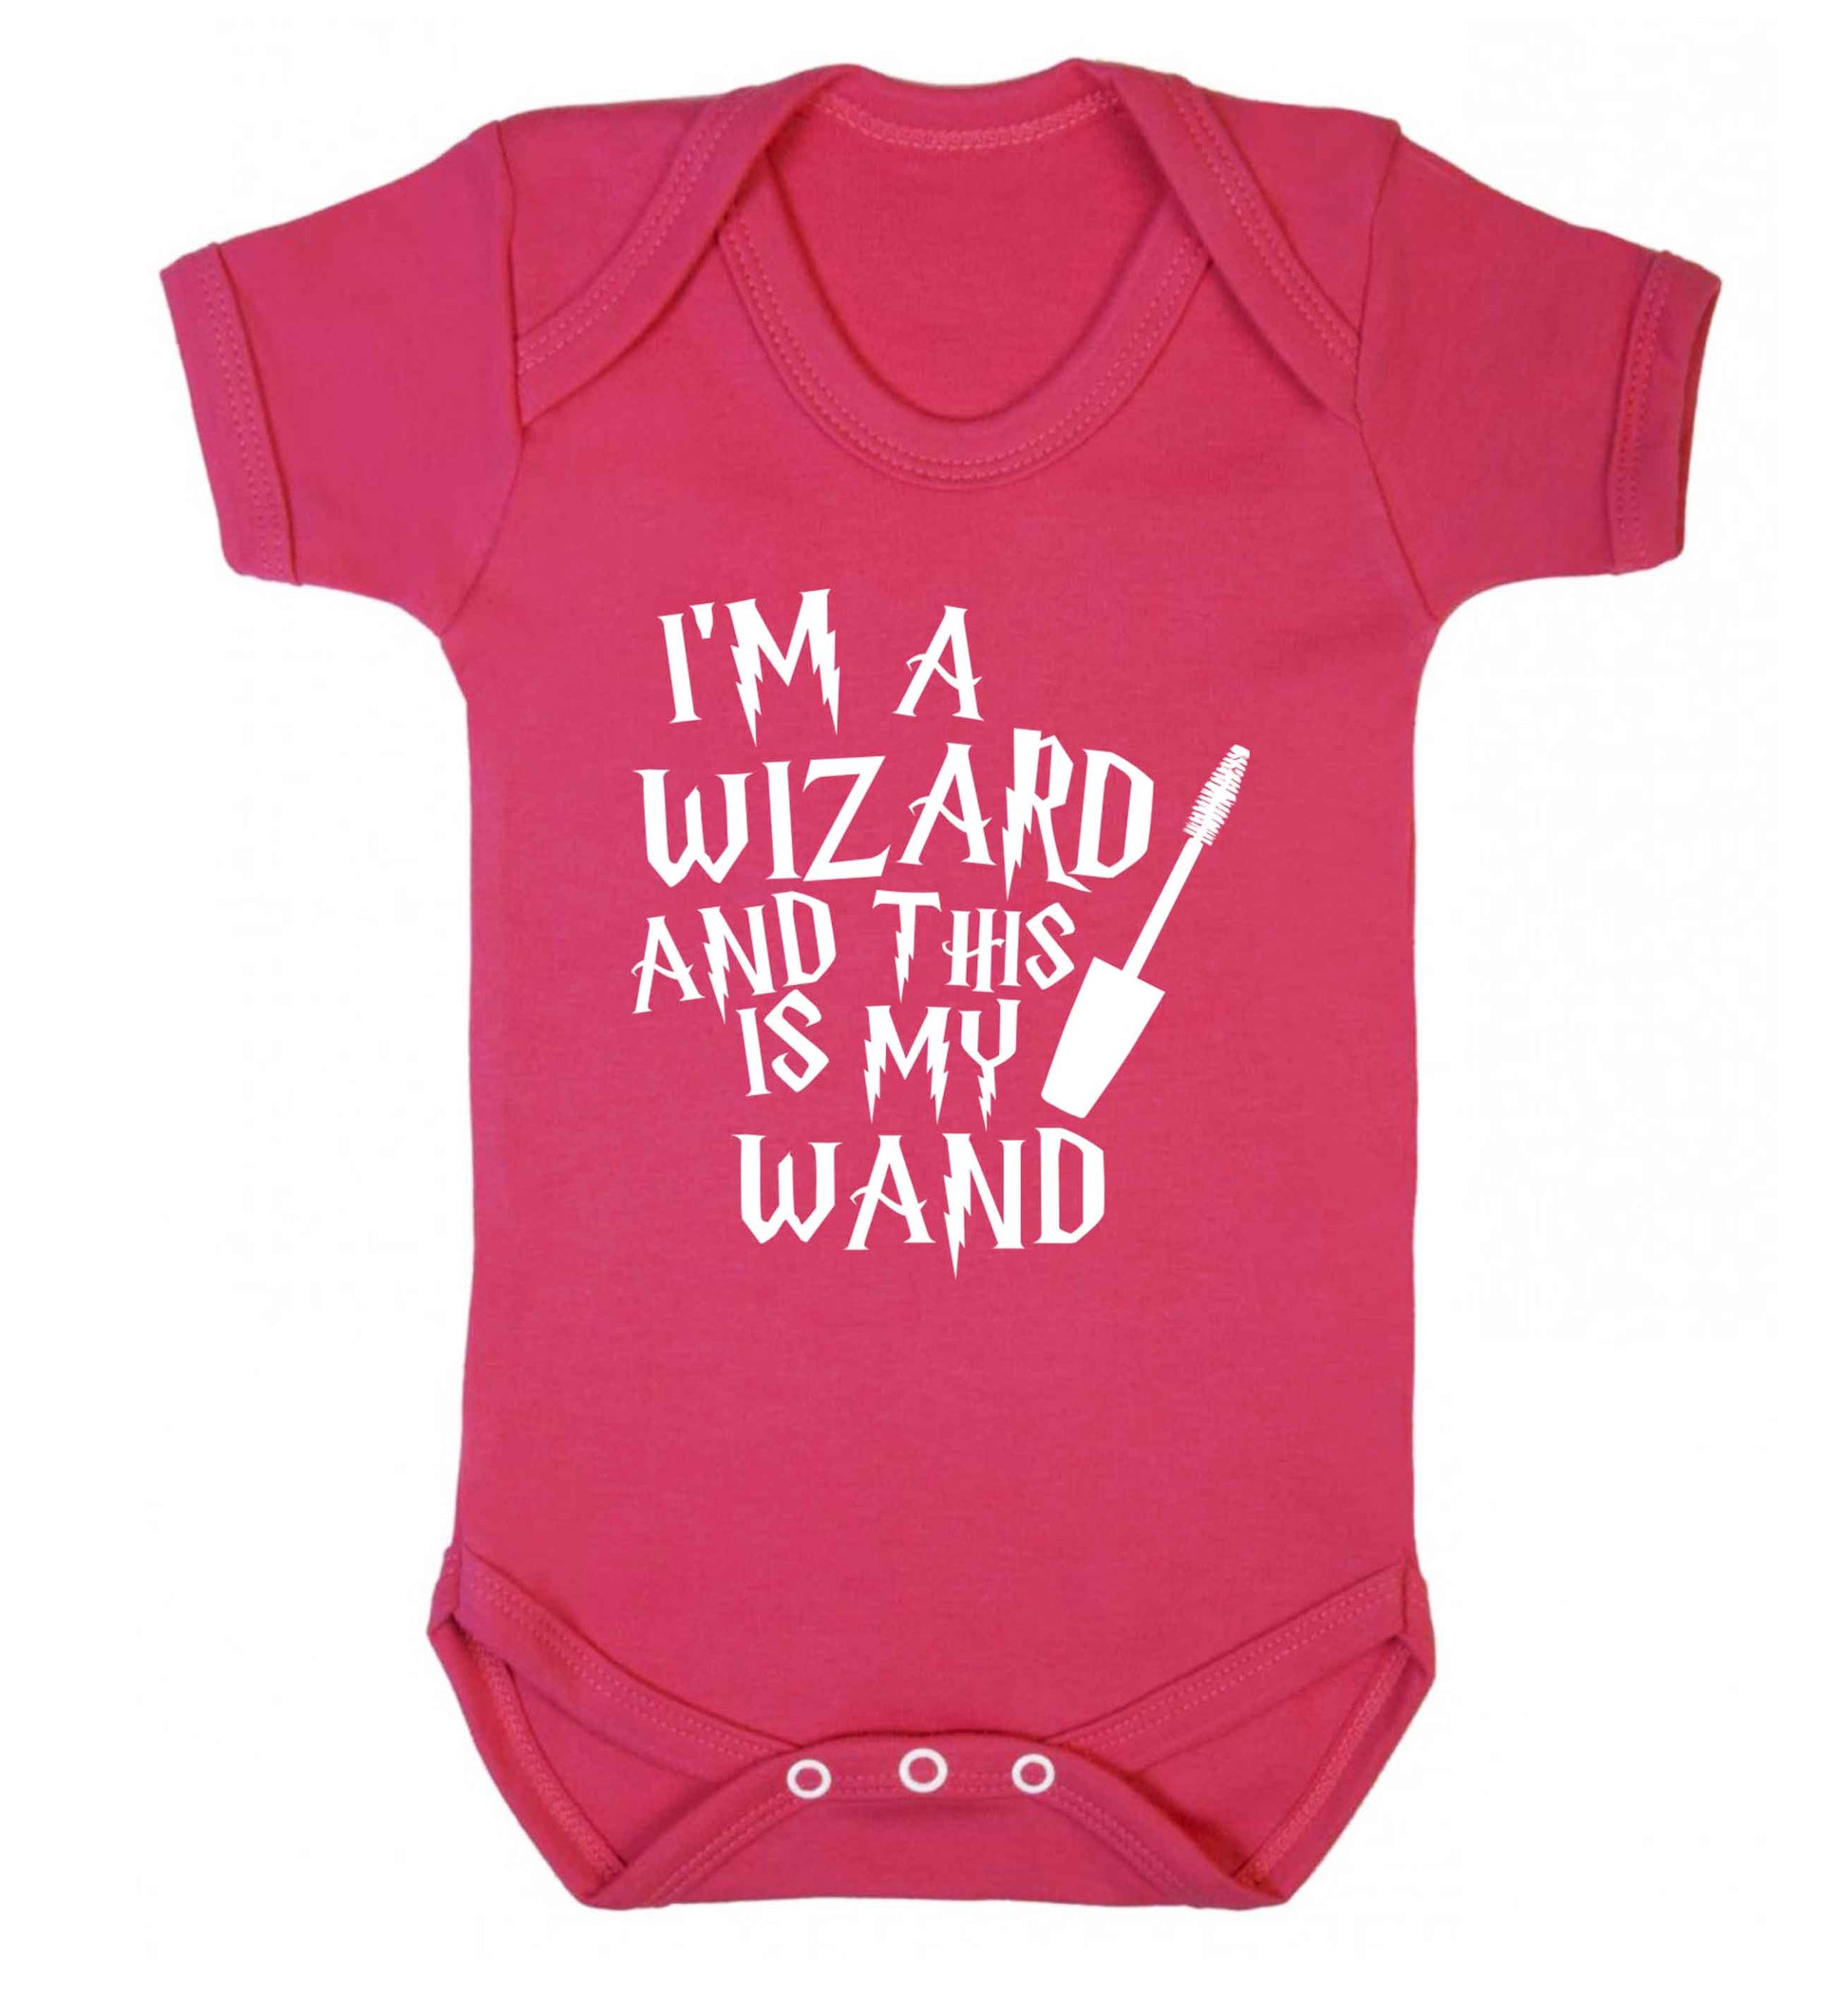 I'm a wizard and this is my wand Baby Vest dark pink 18-24 months